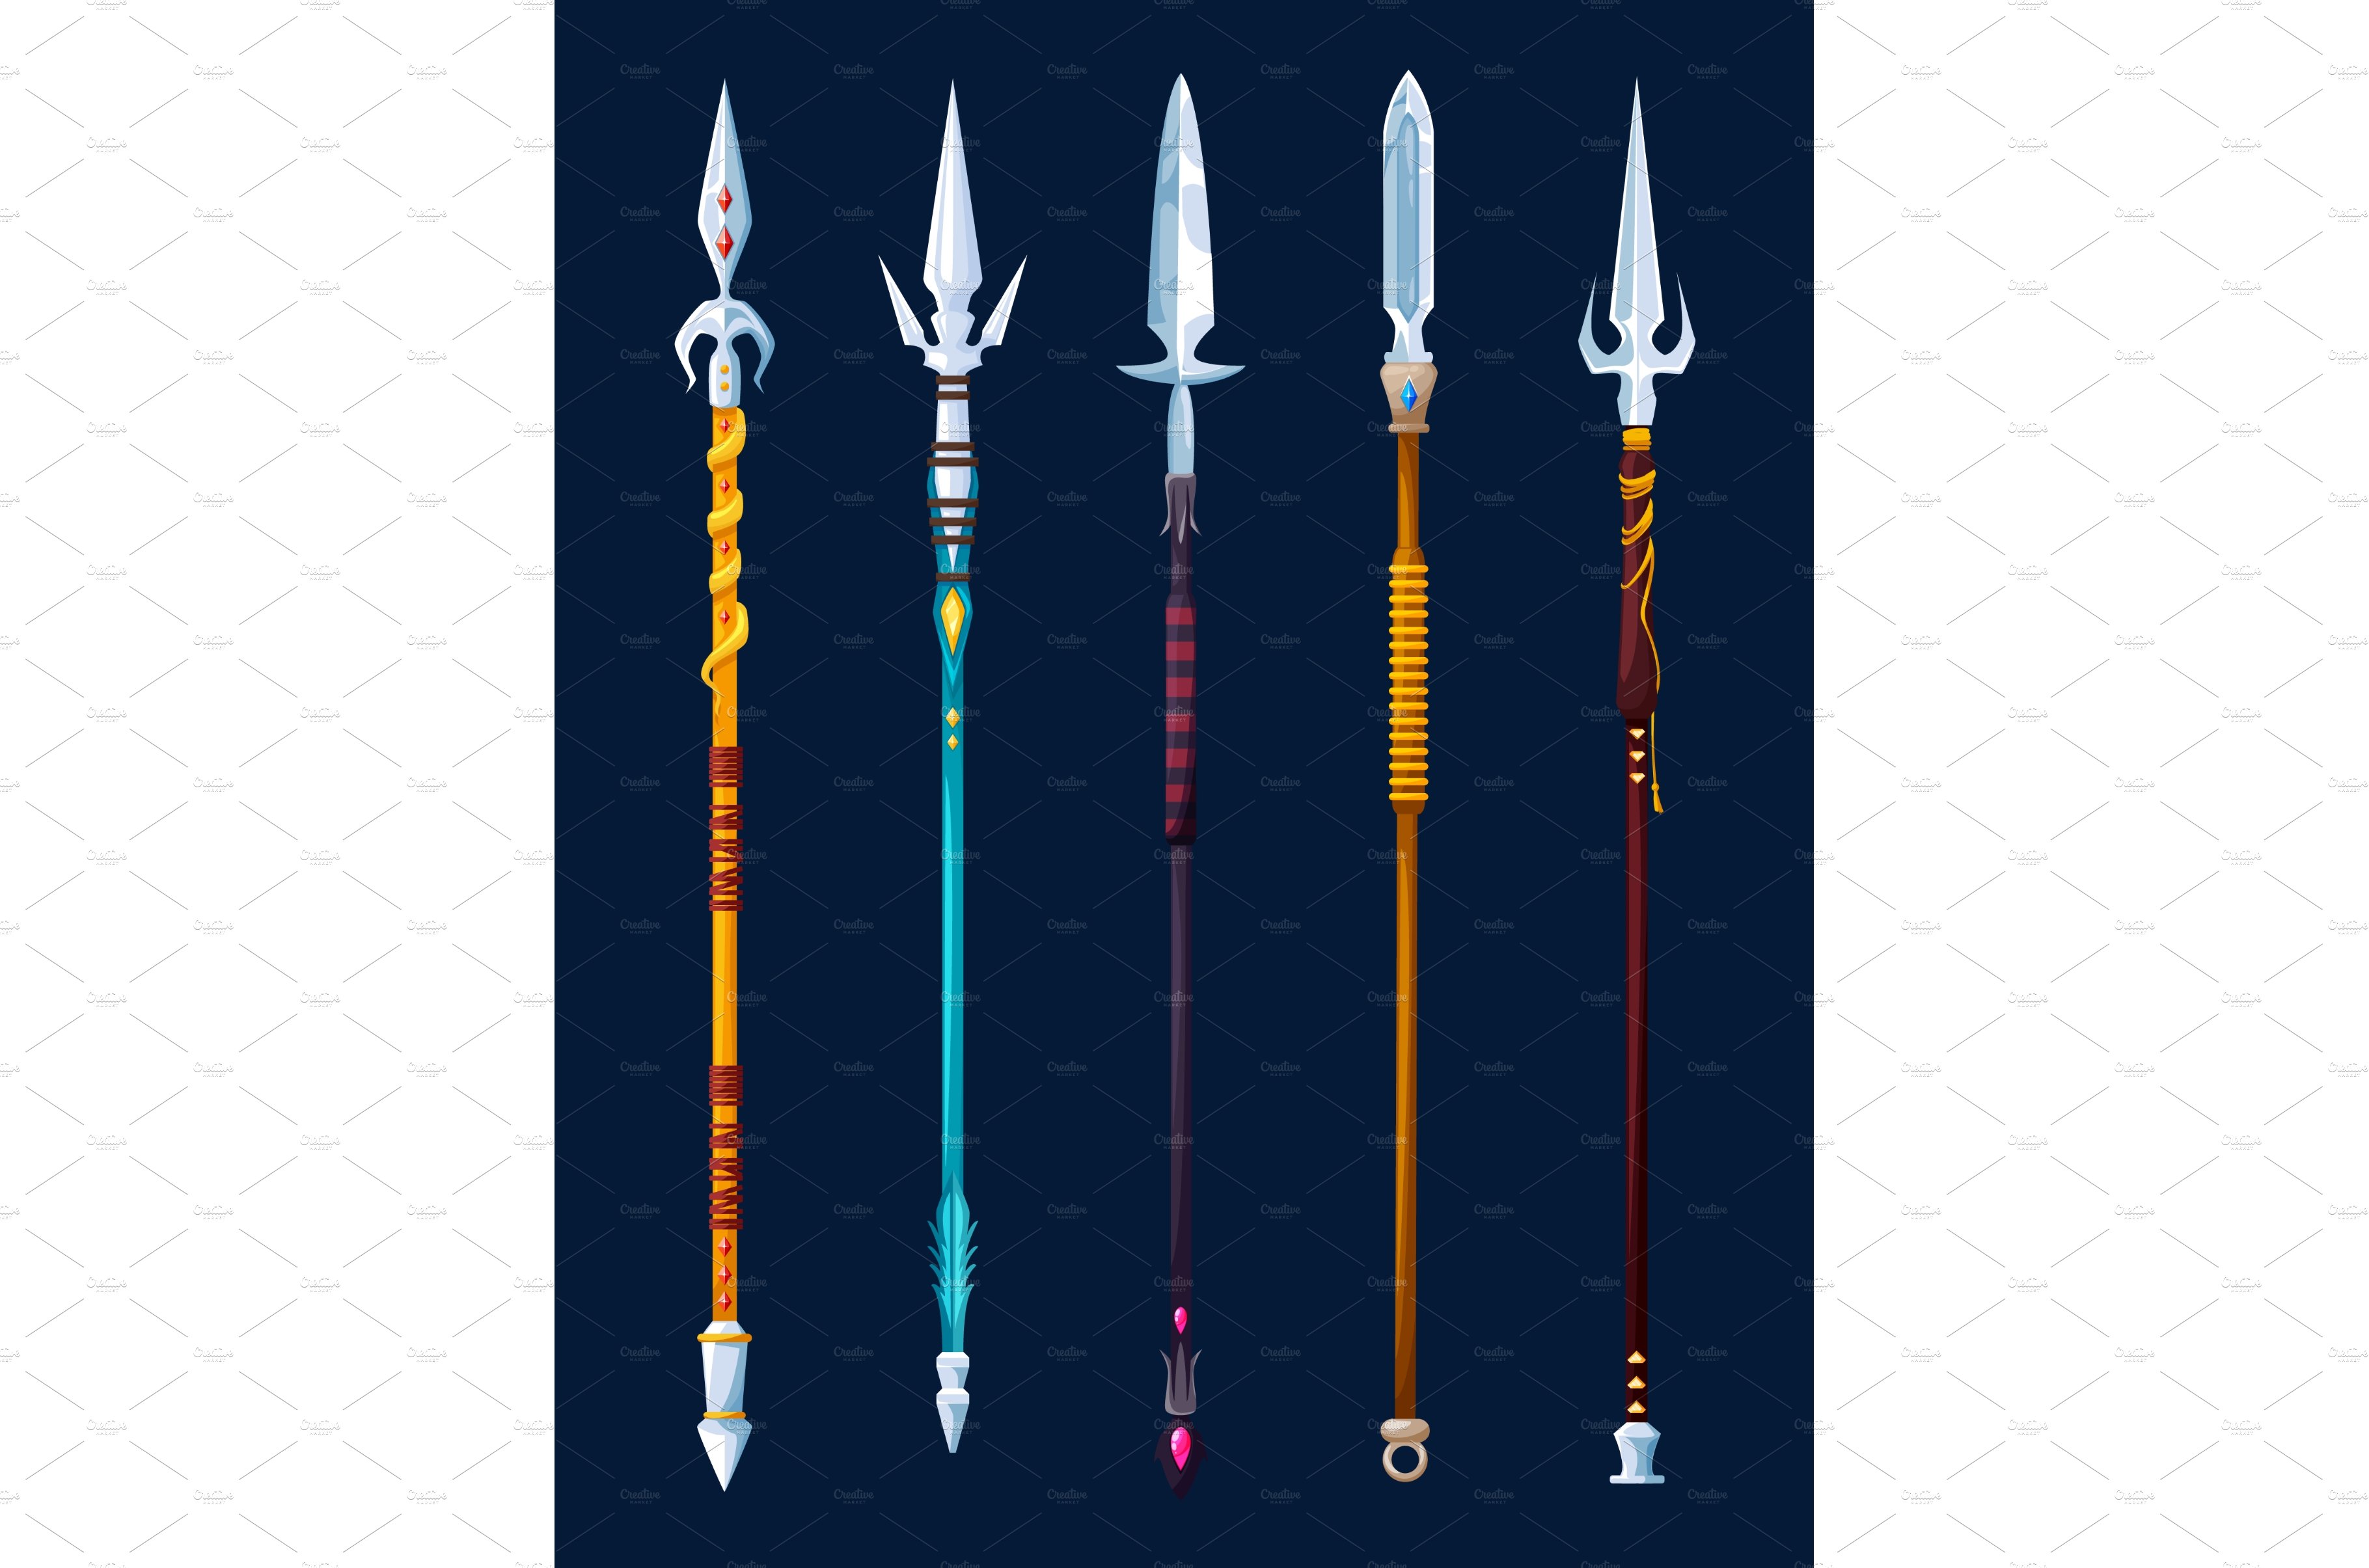 Magical spears and lance weapon cover image.